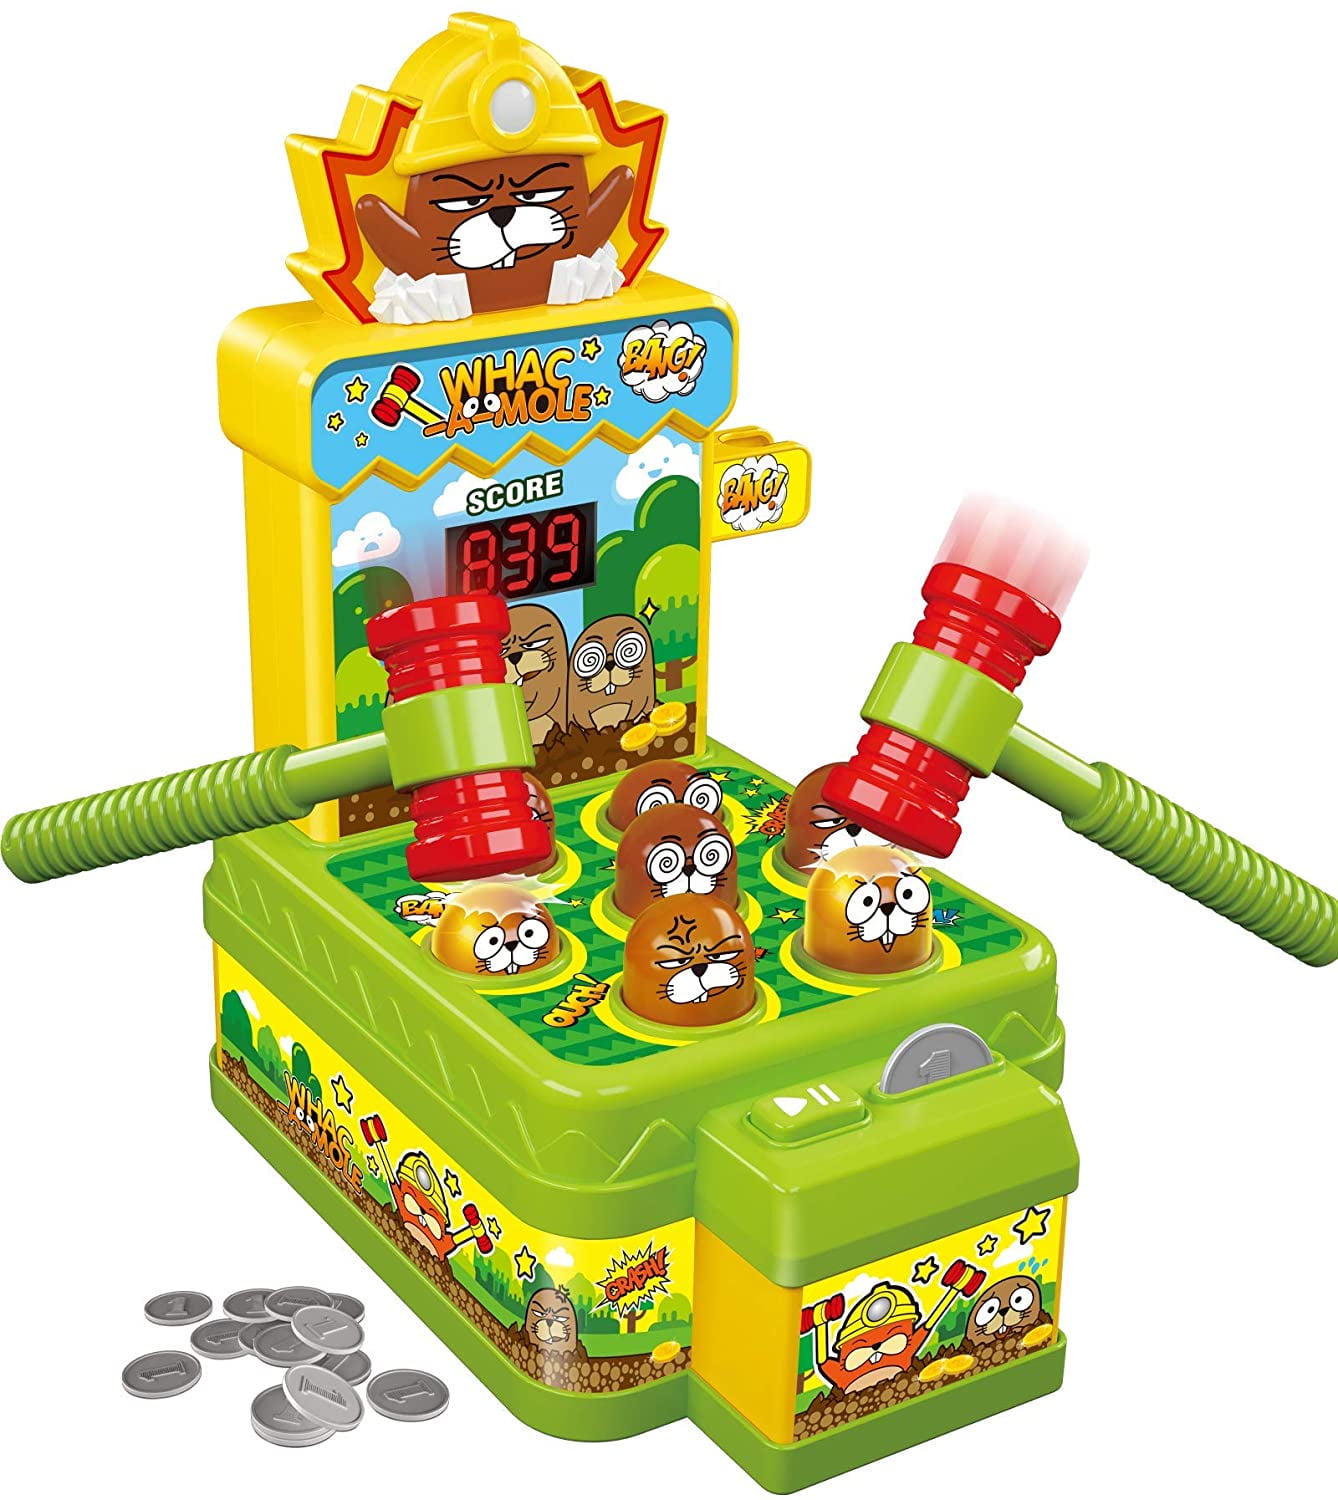 AJ Zombie War Game Whack-a-Mole Whack Game Toy with Mole,Mini Electronic Arcade Game,Pounding Bench Coin game with 2 Hammers